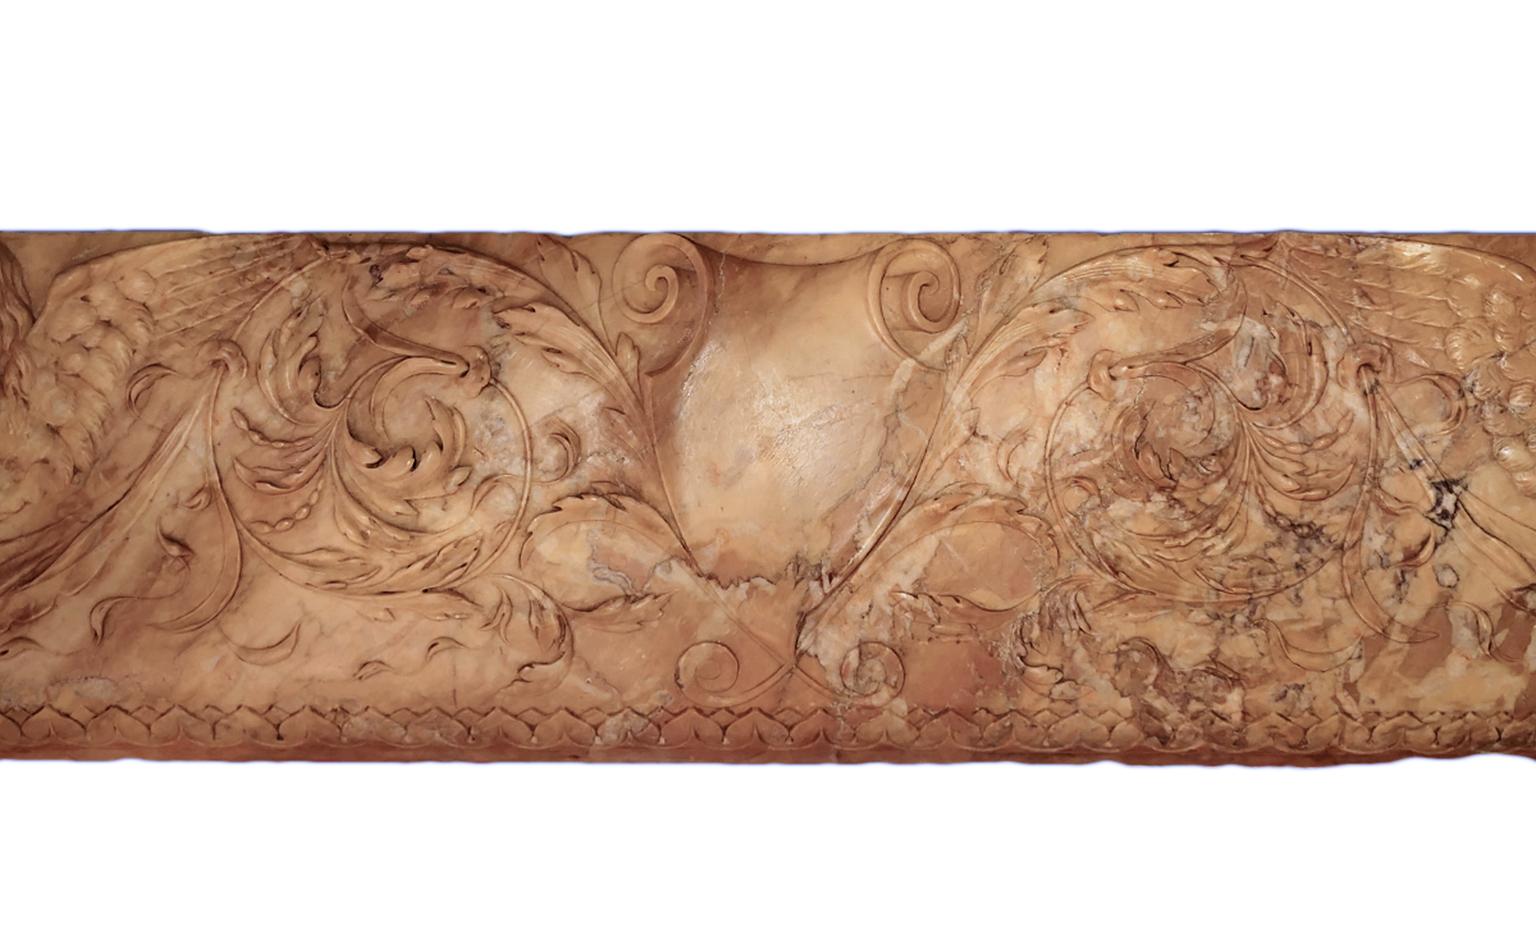 This well carved piece of Sienna marble has probably been used as support for a fireplace mantel. Now it has been mounted on a sturdy wood frame for instalment on a wall, above a door or similar for decoration. The carvings are very detailed and